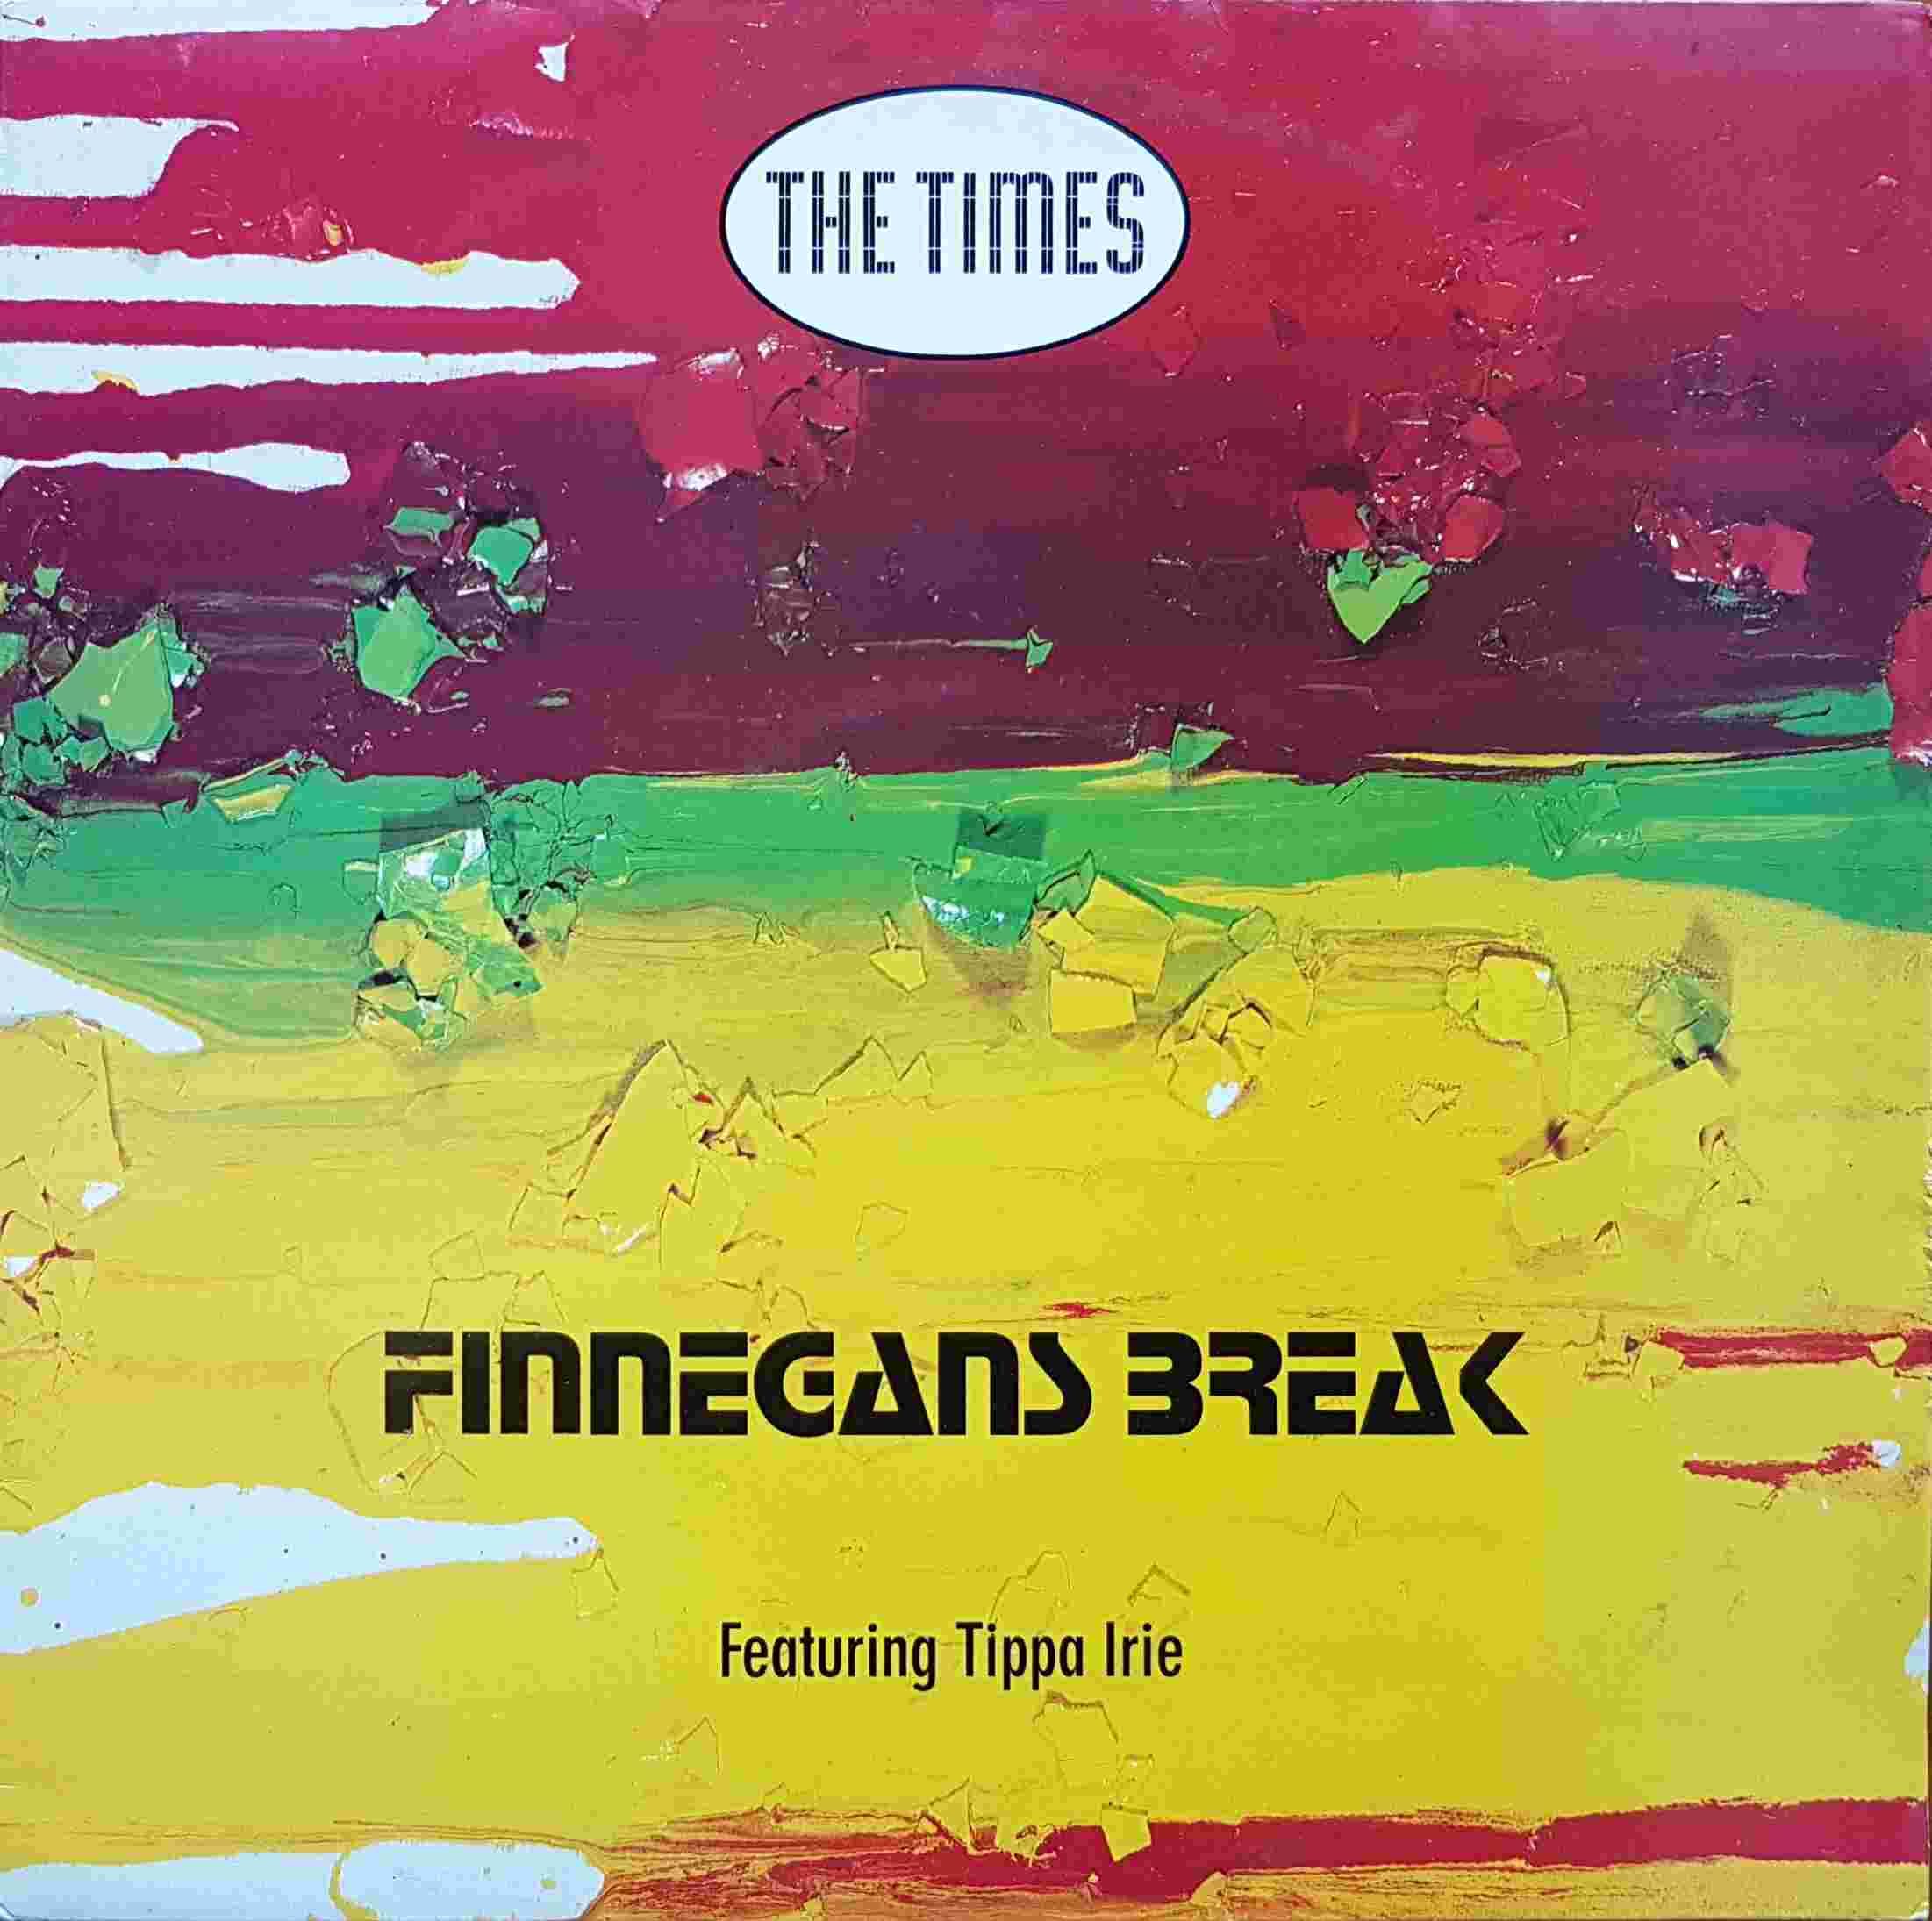 Picture of Finnegans break by artist Ball / Henry / The Times 